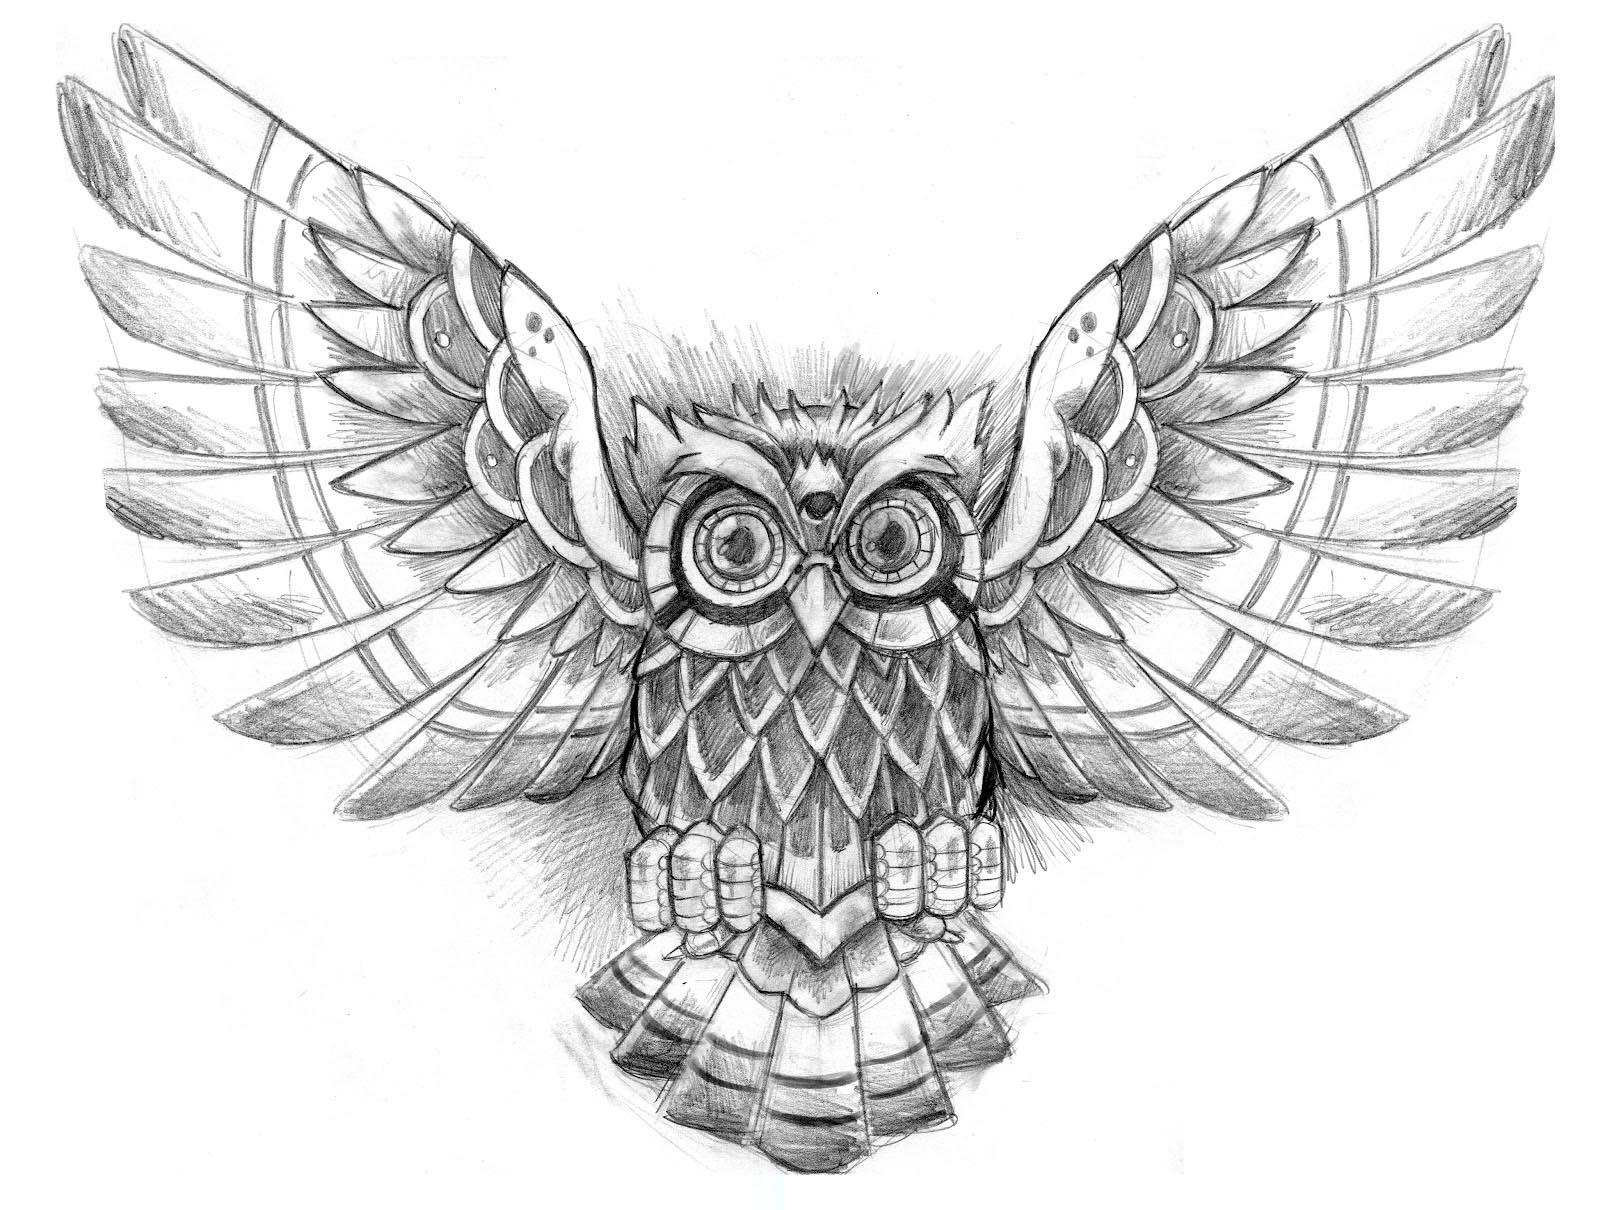 Owl Tattoos Designs Ideas And Meaning   Tattoos For You